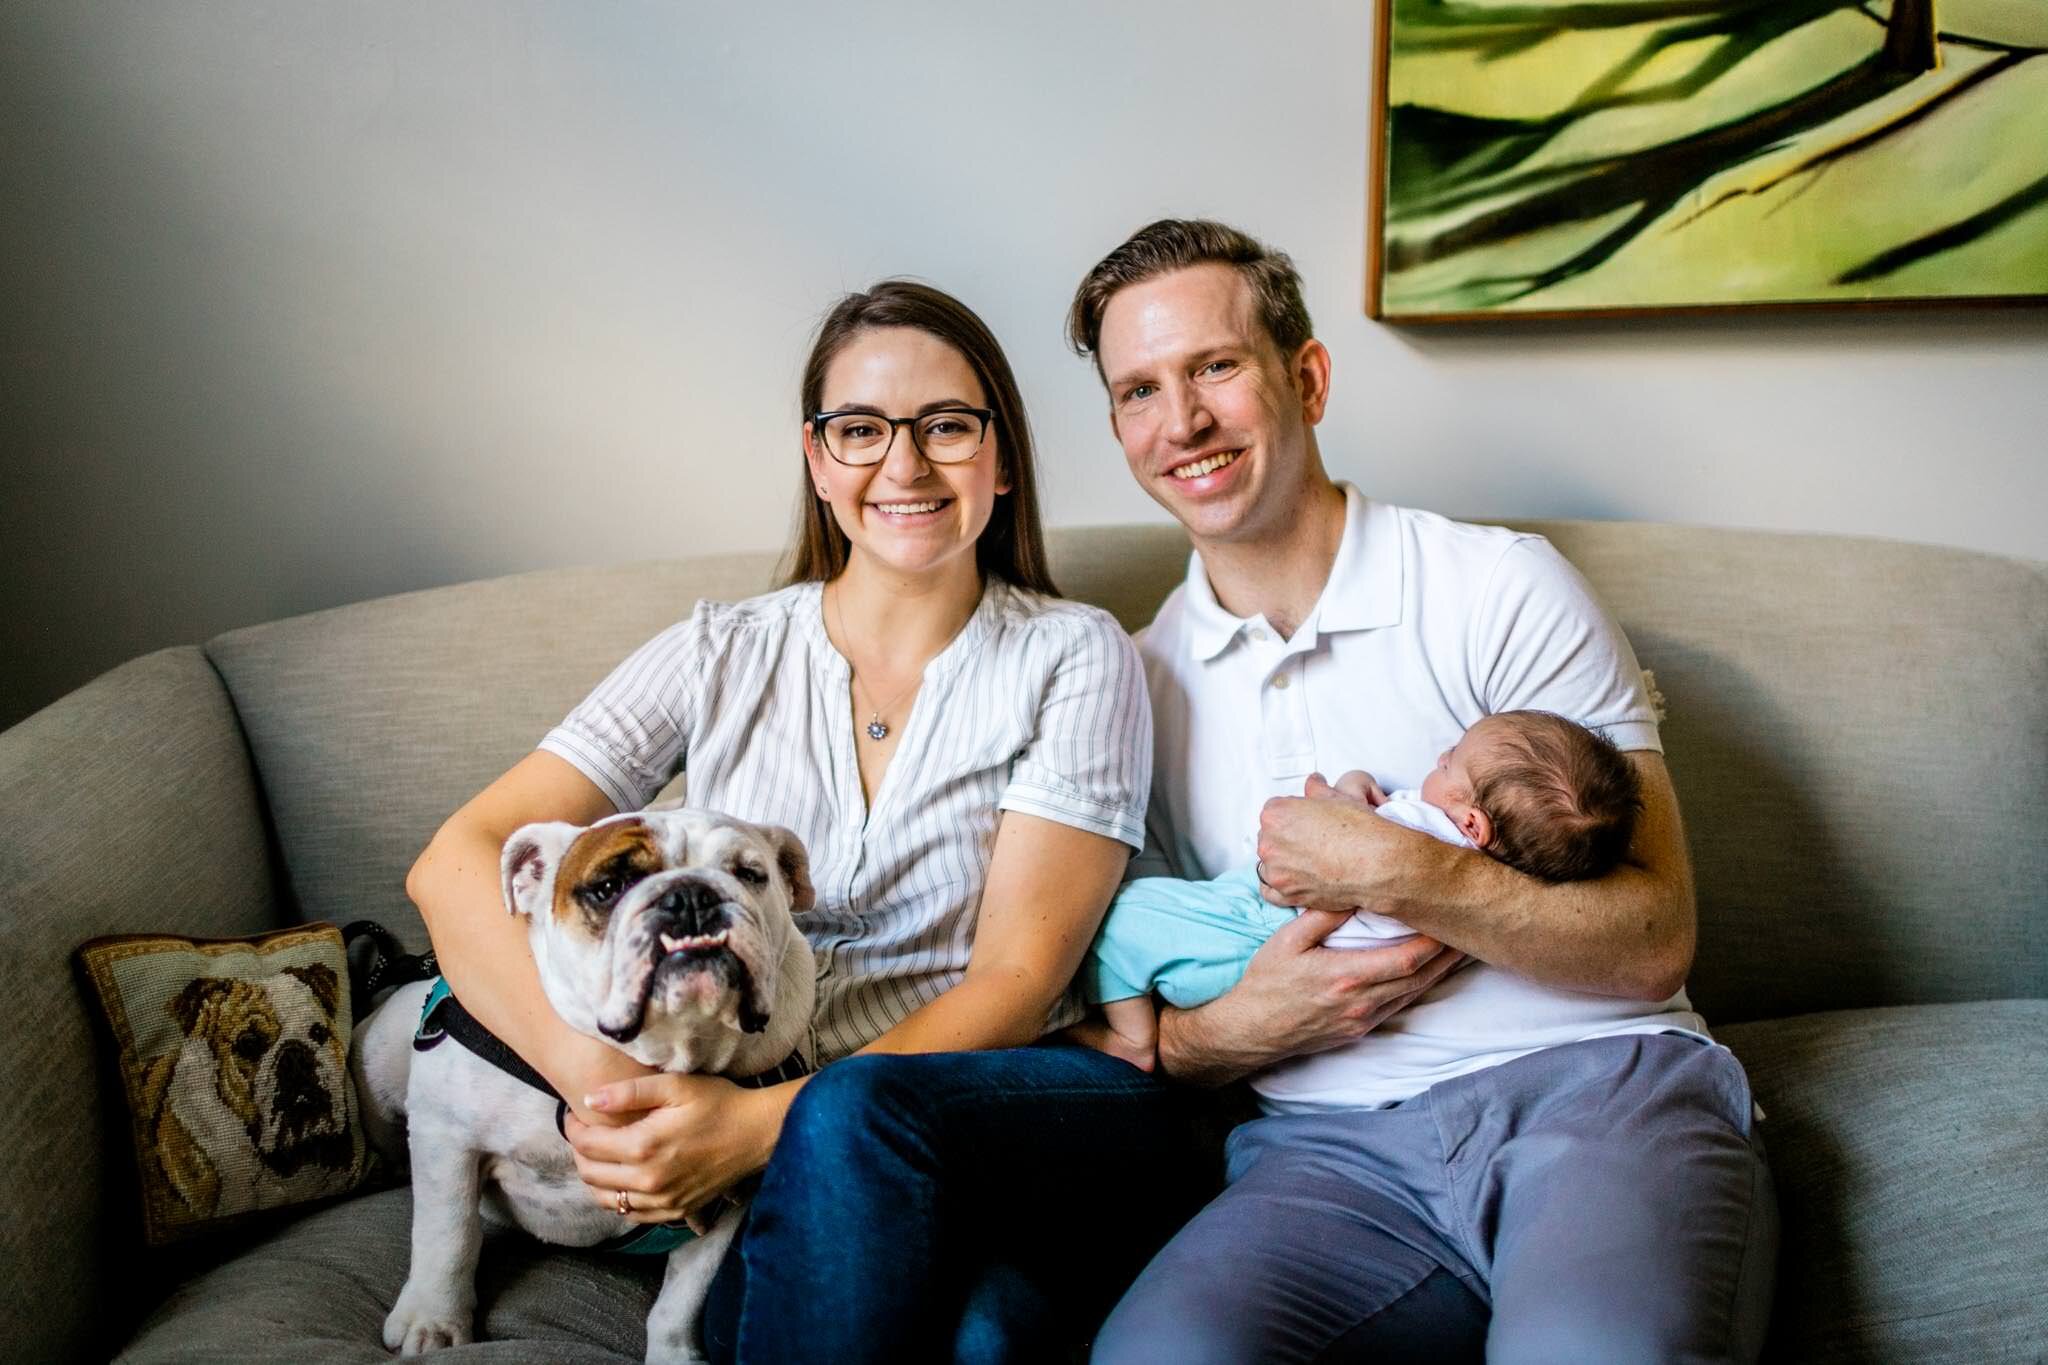 Raleigh Newborn Photographer | By G. Lin Photography | Family with dog and baby sitting on couch